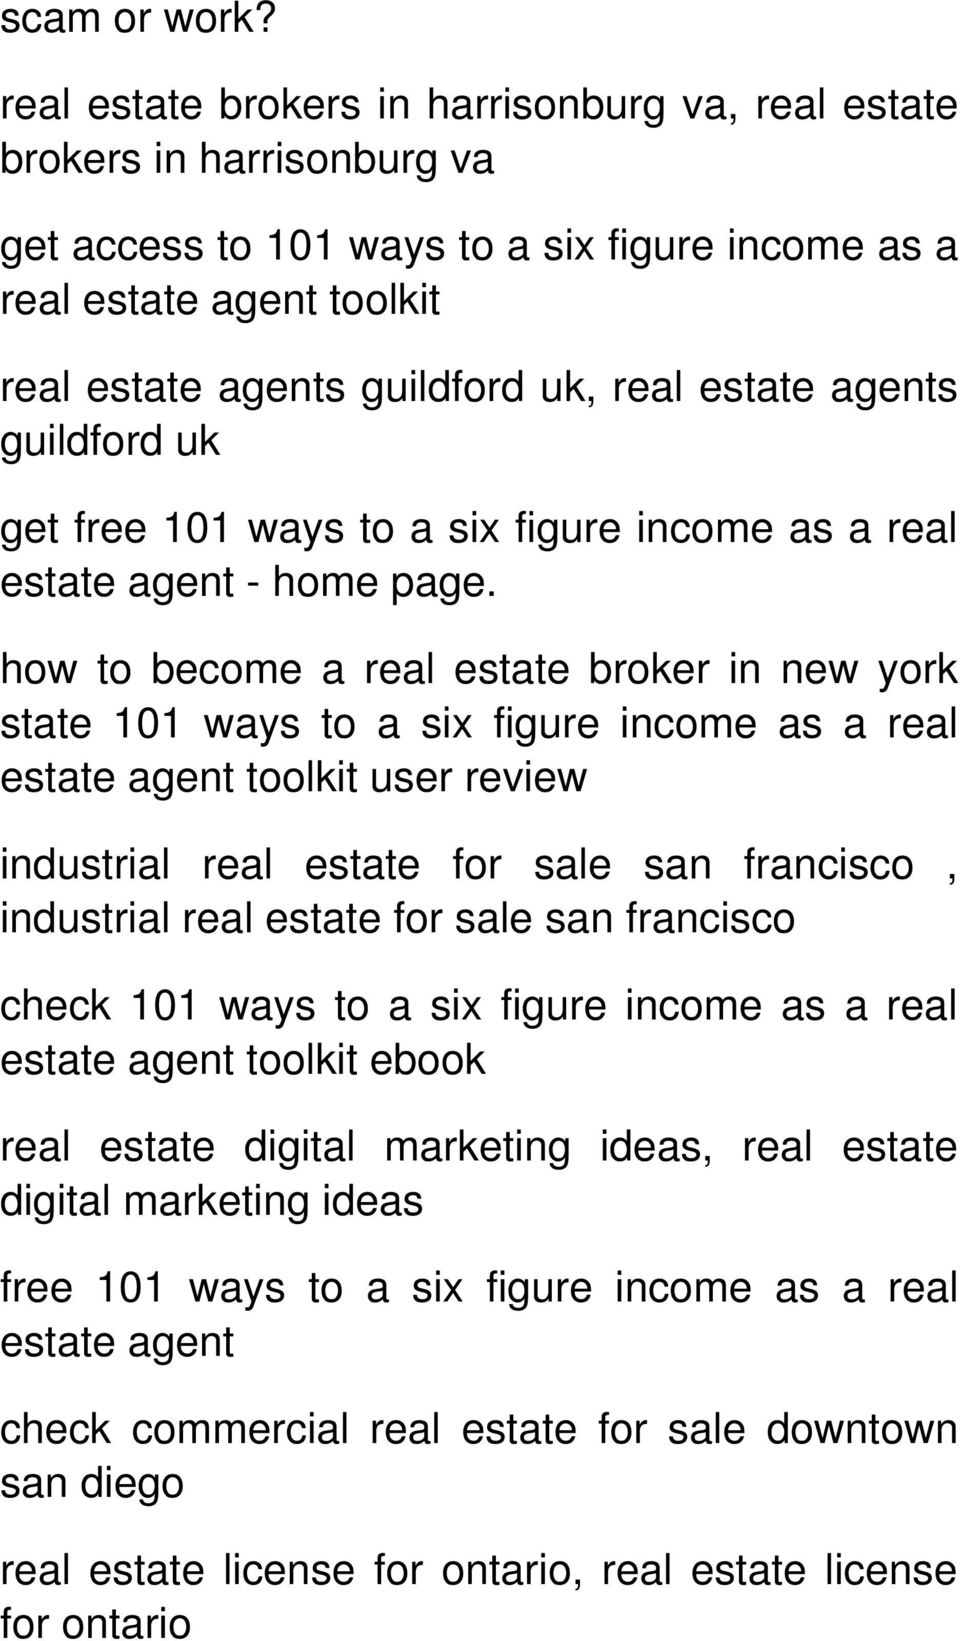 estate agents guildford uk get free 101 ways to a six figure income as a real estate agent - home page.